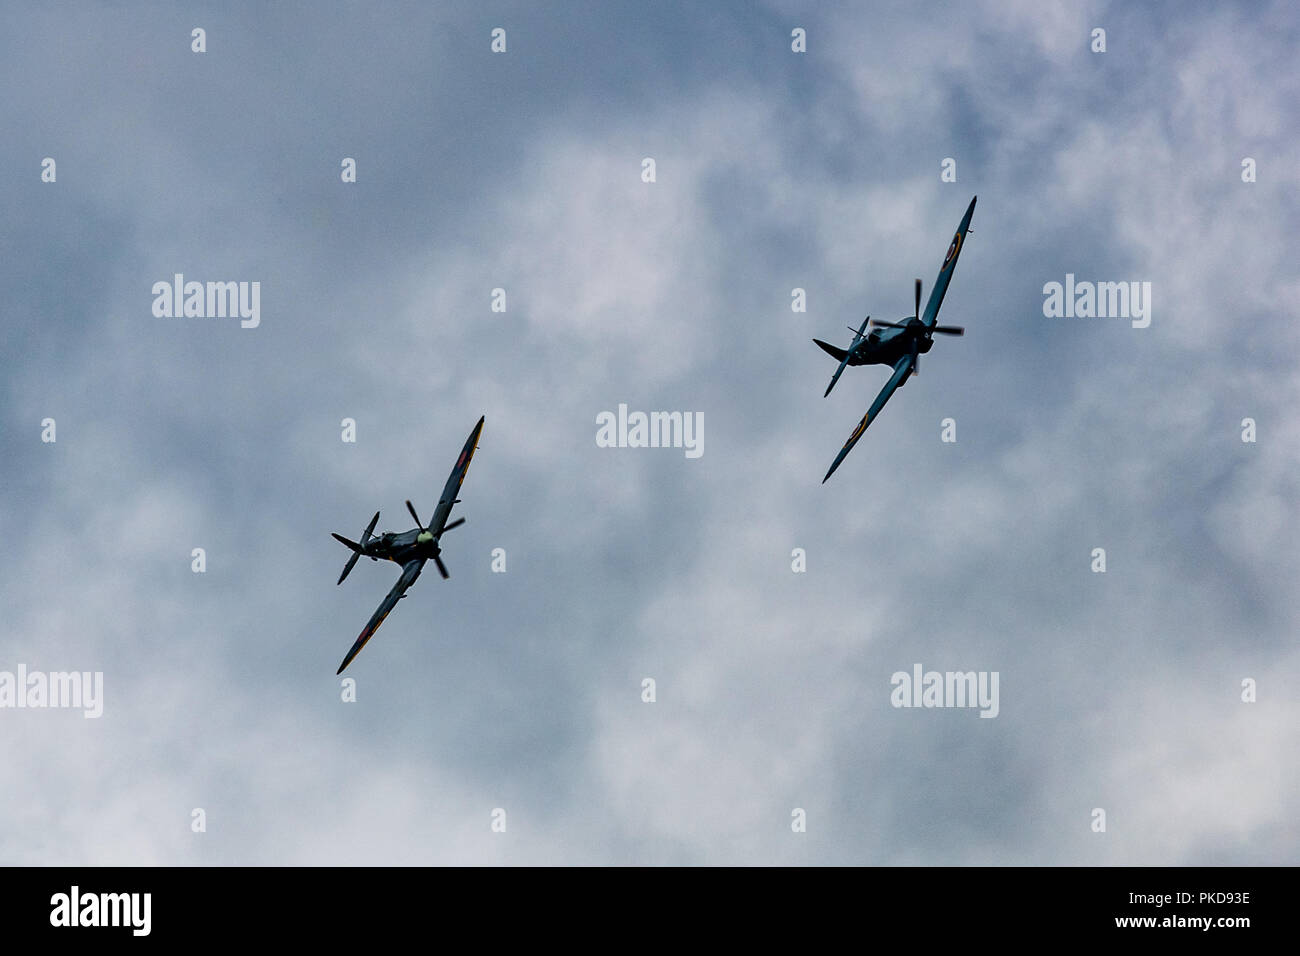 Two Spitfires flying in formation, banking against a cloudy August sky. Stock Photo